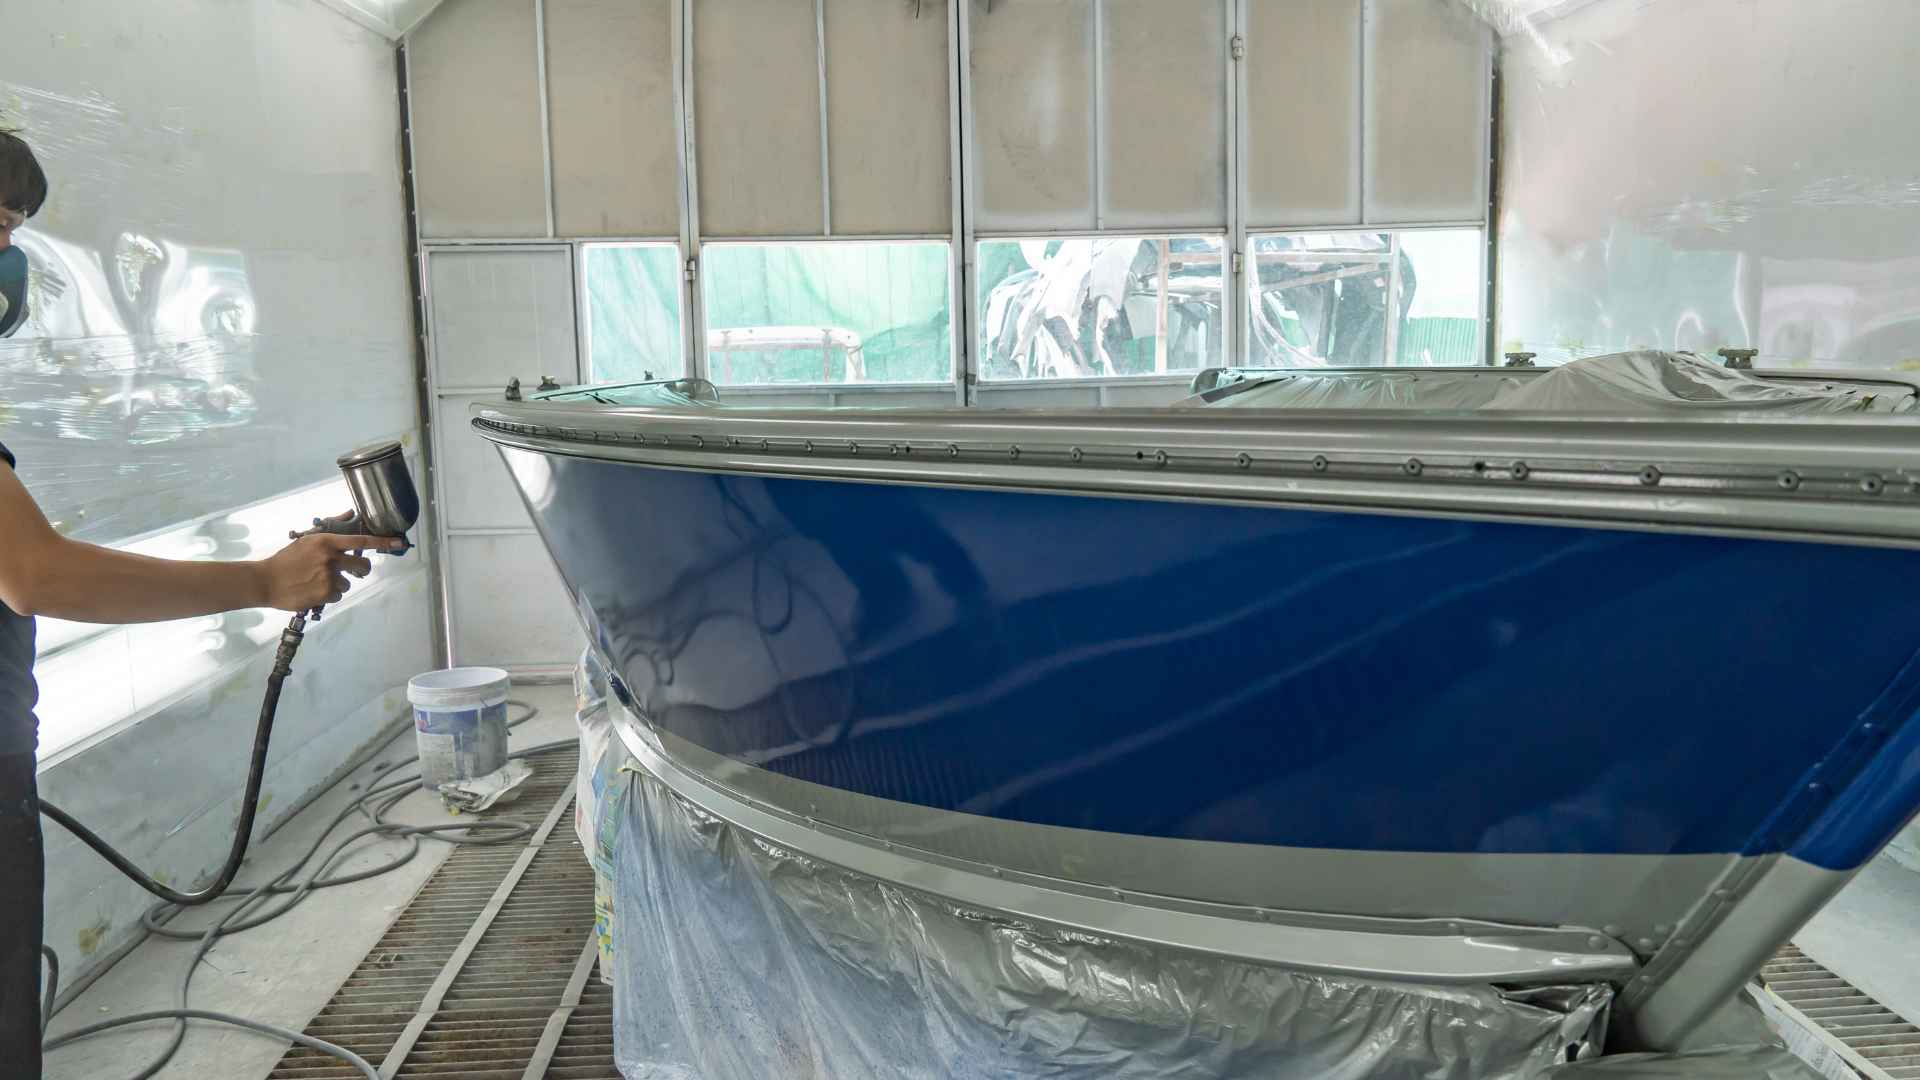 How to paint a boat